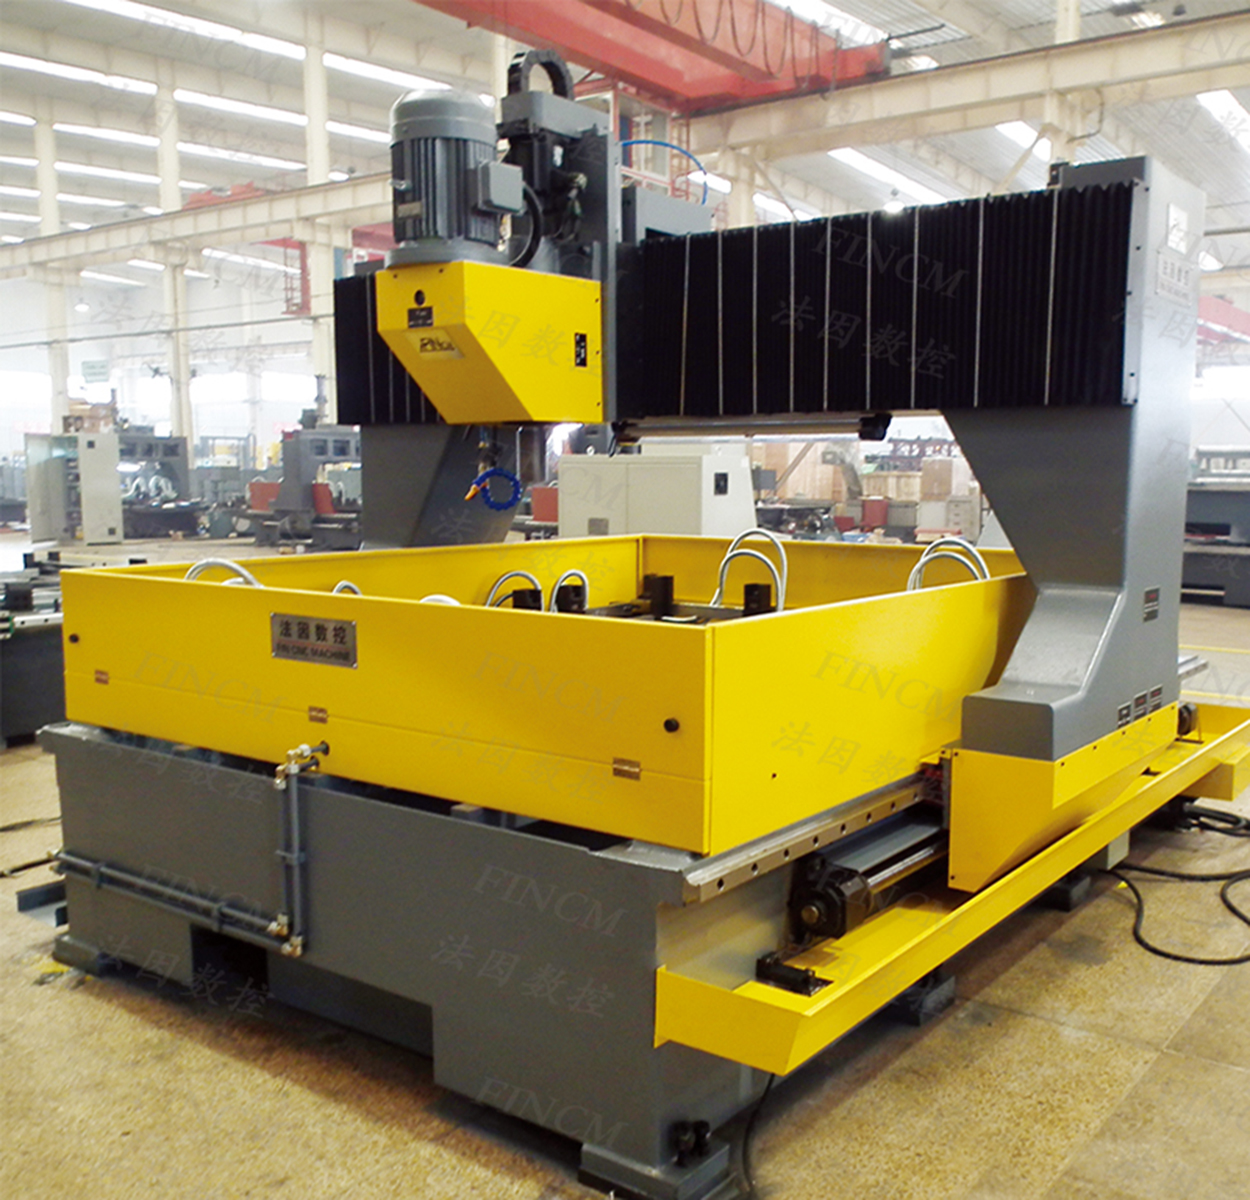 PLD7030-2 Gantry Mobile CNC Plate Drilling Machine Featured Image